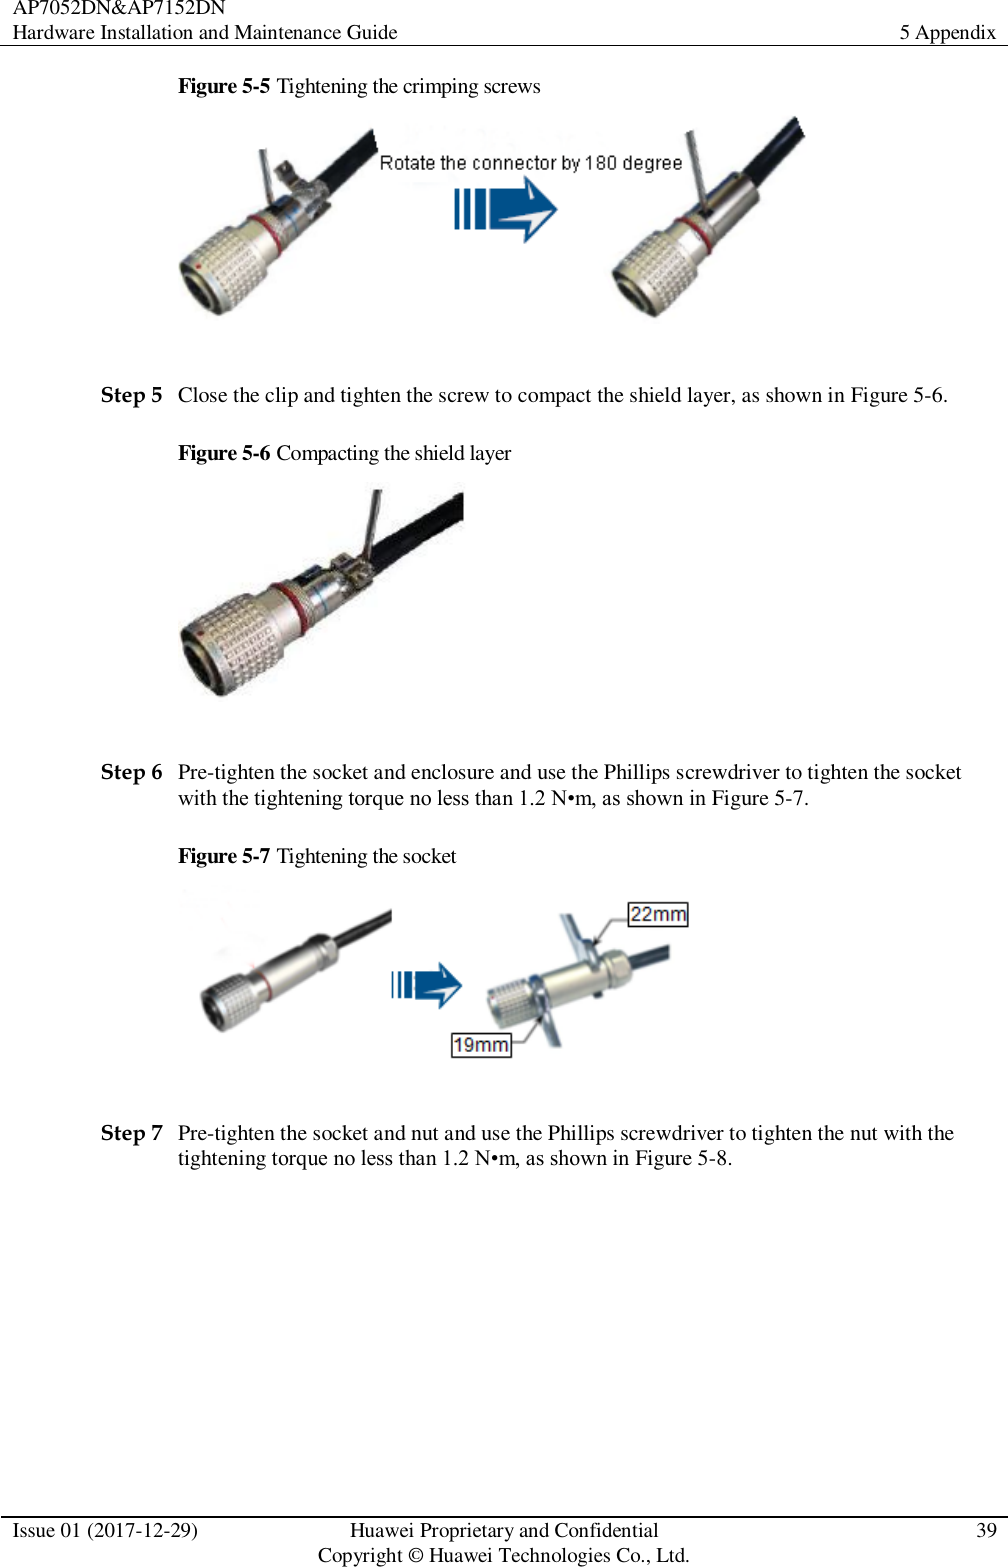 AP7052DN&amp;AP7152DN Hardware Installation and Maintenance Guide 5 Appendix  Issue 01 (2017-12-29) Huawei Proprietary and Confidential                                     Copyright © Huawei Technologies Co., Ltd. 39  Figure 5-5 Tightening the crimping screws   Step 5 Close the clip and tighten the screw to compact the shield layer, as shown in Figure 5-6. Figure 5-6 Compacting the shield layer   Step 6 Pre-tighten the socket and enclosure and use the Phillips screwdriver to tighten the socket with the tightening torque no less than 1.2 N•m, as shown in Figure 5-7. Figure 5-7 Tightening the socket   Step 7 Pre-tighten the socket and nut and use the Phillips screwdriver to tighten the nut with the tightening torque no less than 1.2 N•m, as shown in Figure 5-8. 